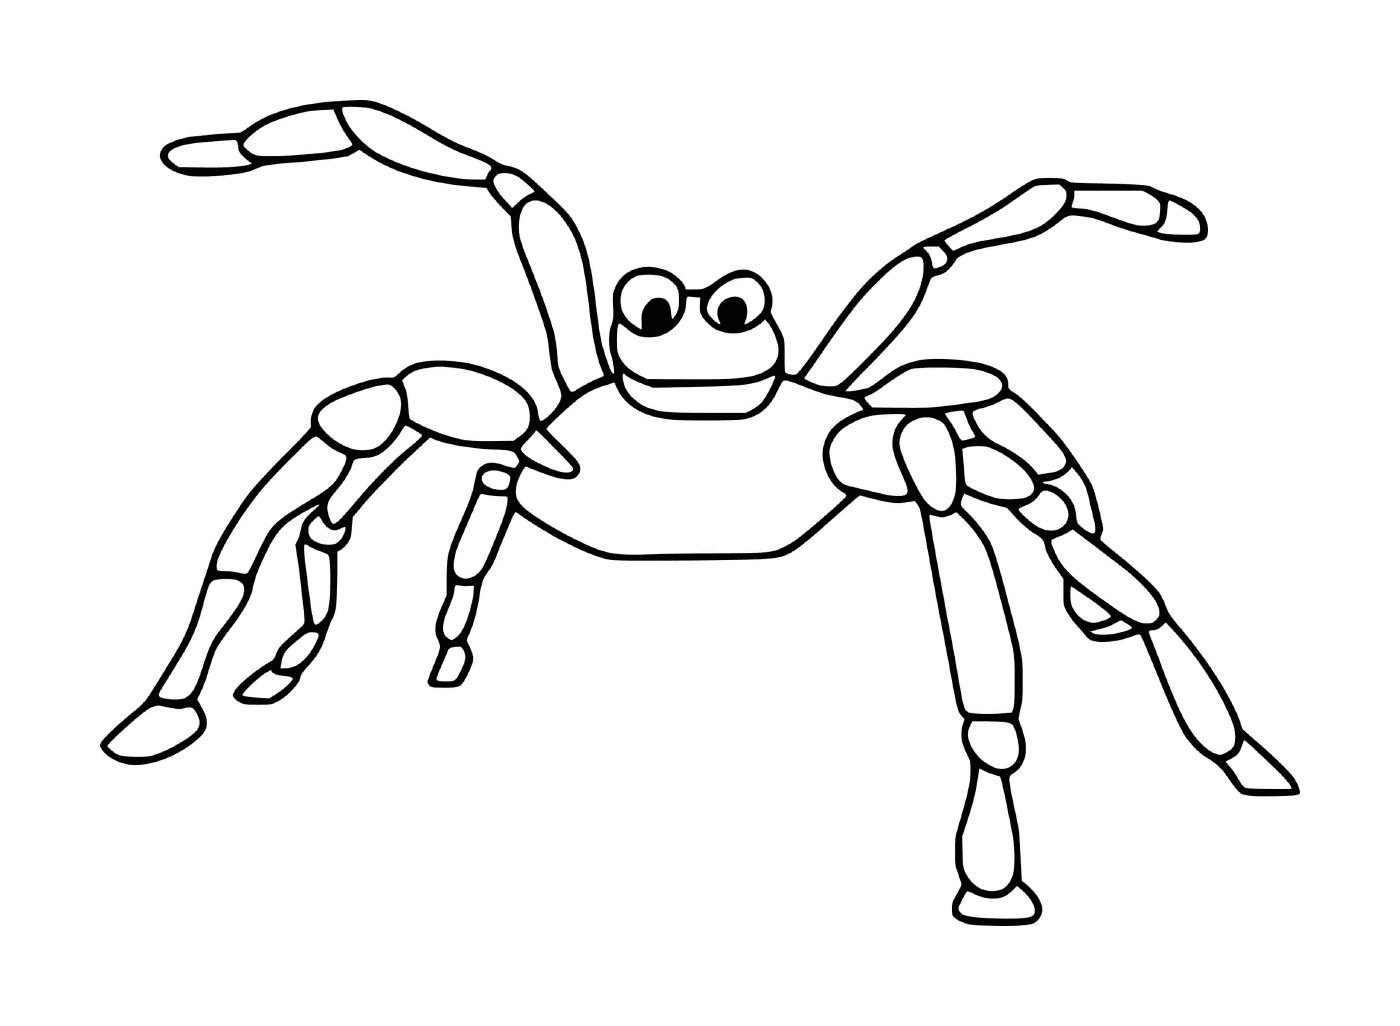  A scary spider 